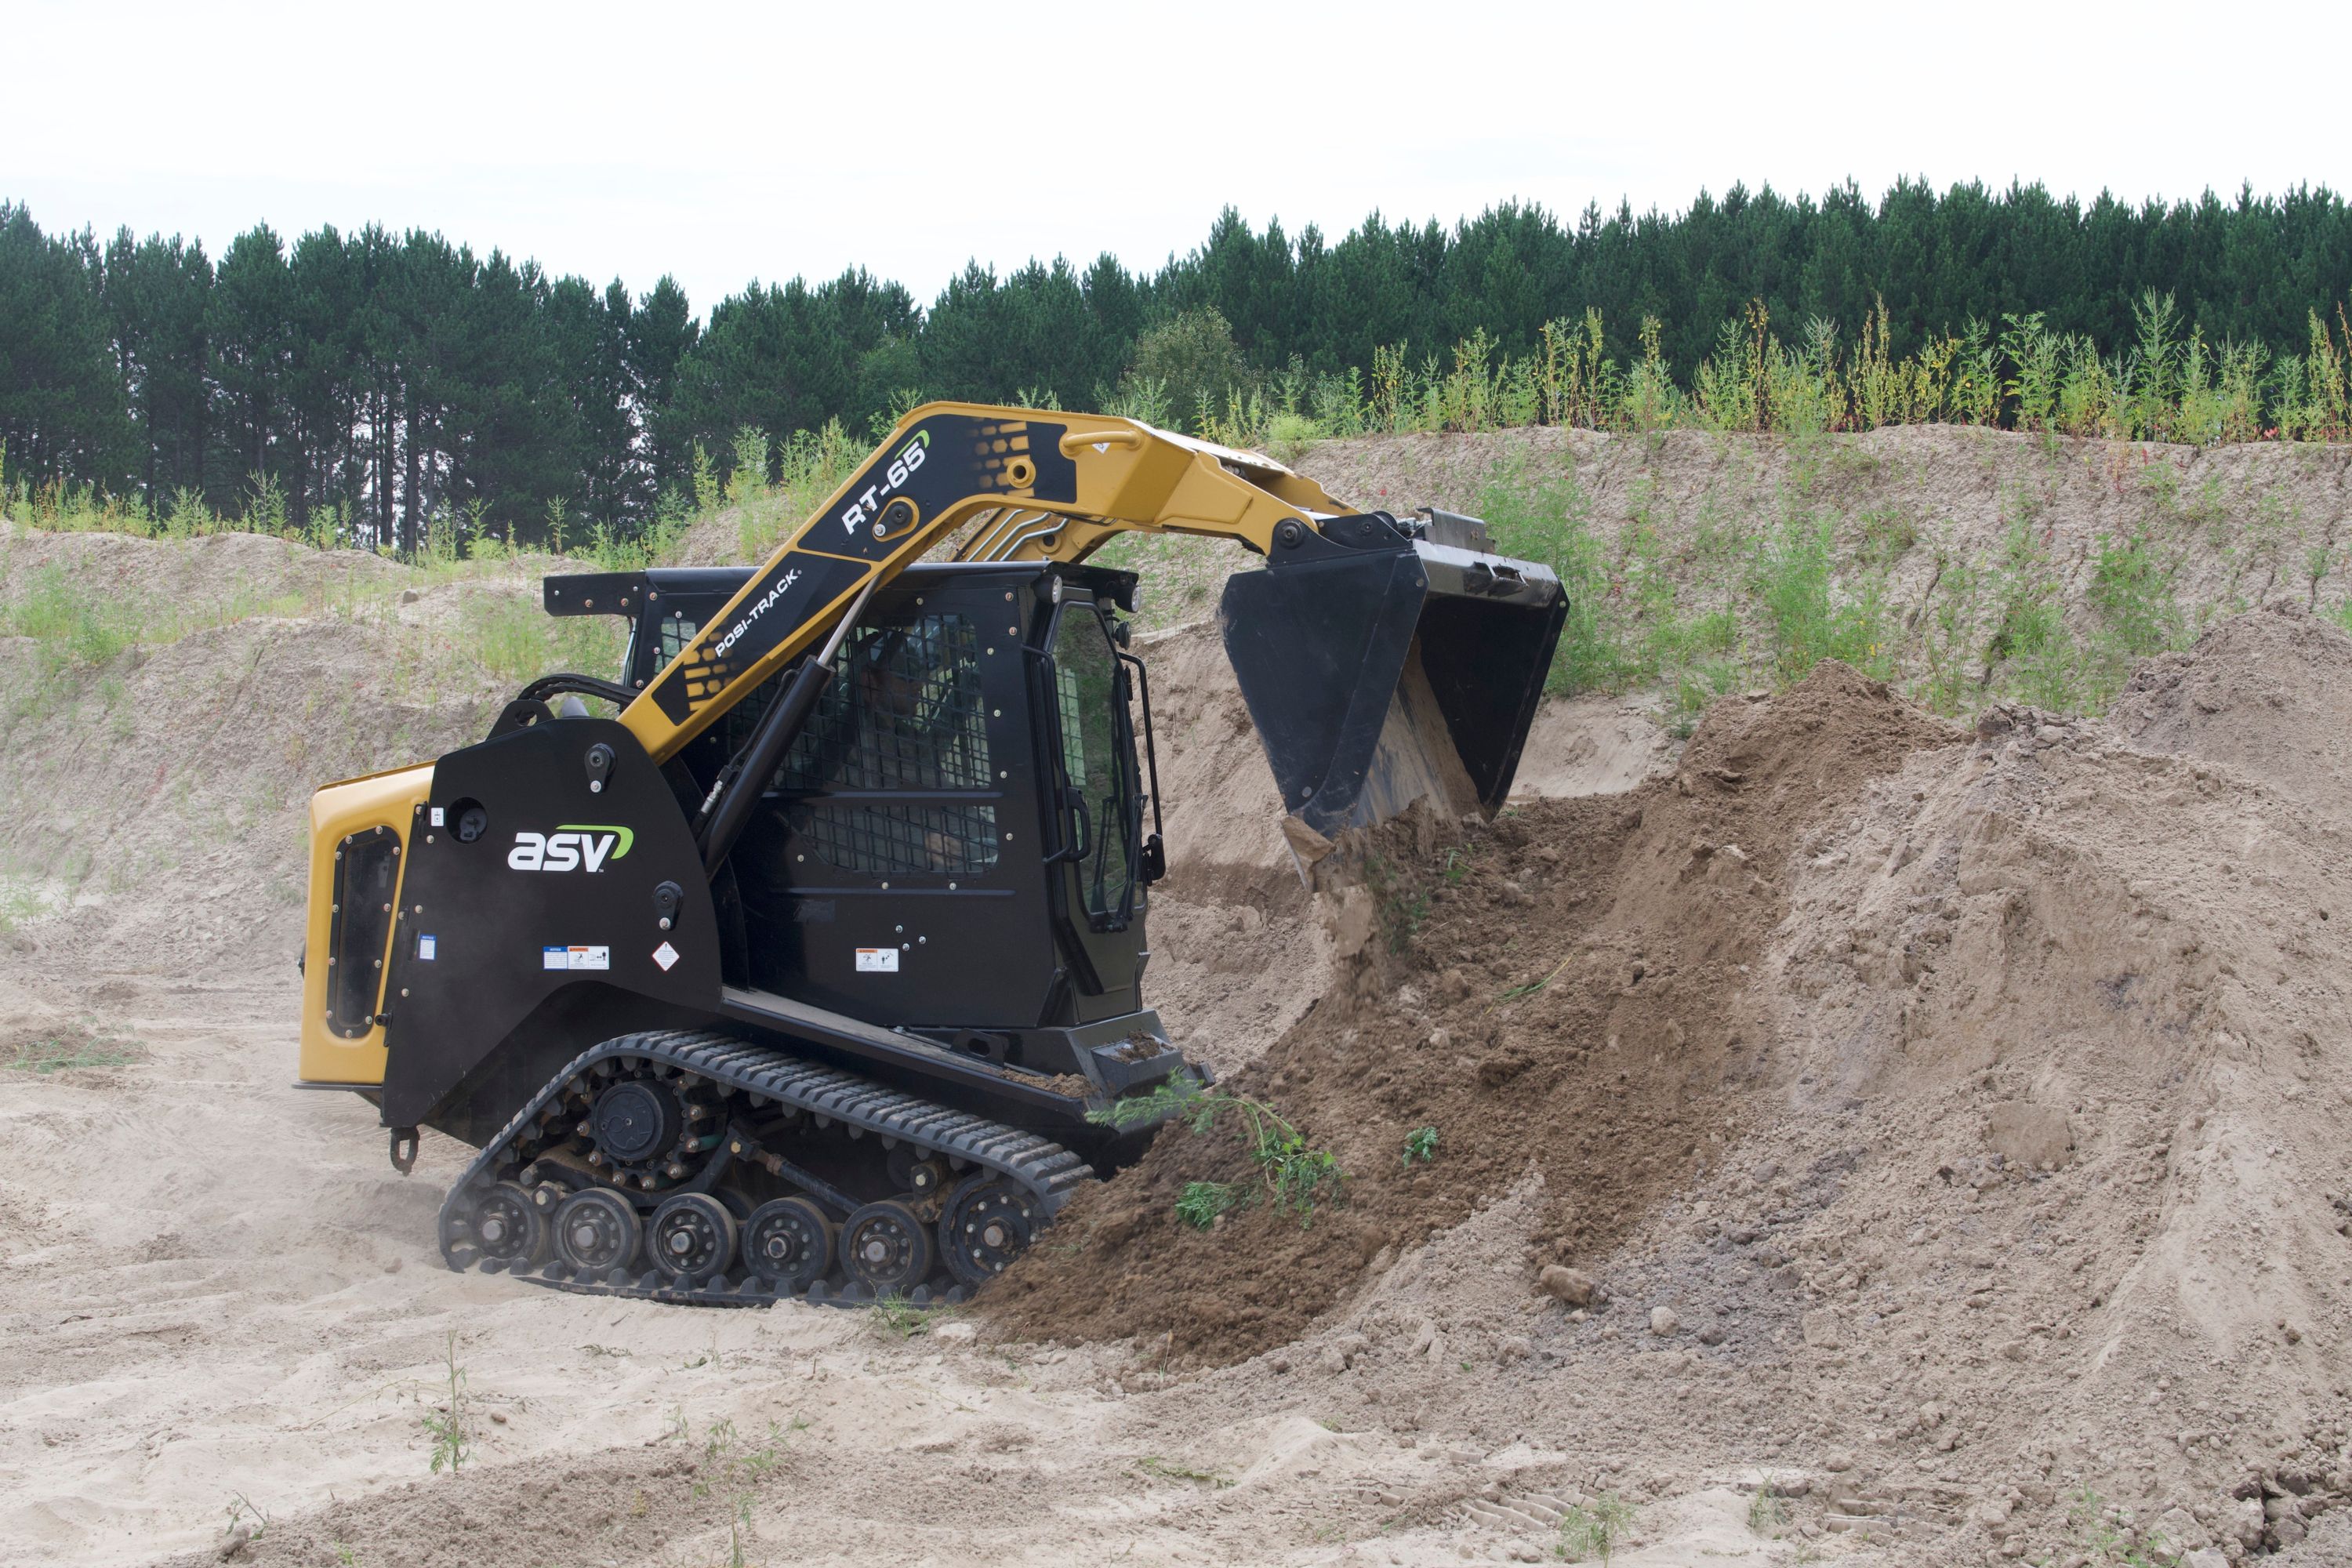 ASV Holdings Inc., Delta Power Equipment, Buckeye Power Sales, Heavy Machines Inc., Kruseman Implement, Robin Rents, R&S Industries Inc., Compact Track Loaders, Rubber Track Undercarriage, Construction Equipment, Forestry, Skid Steers